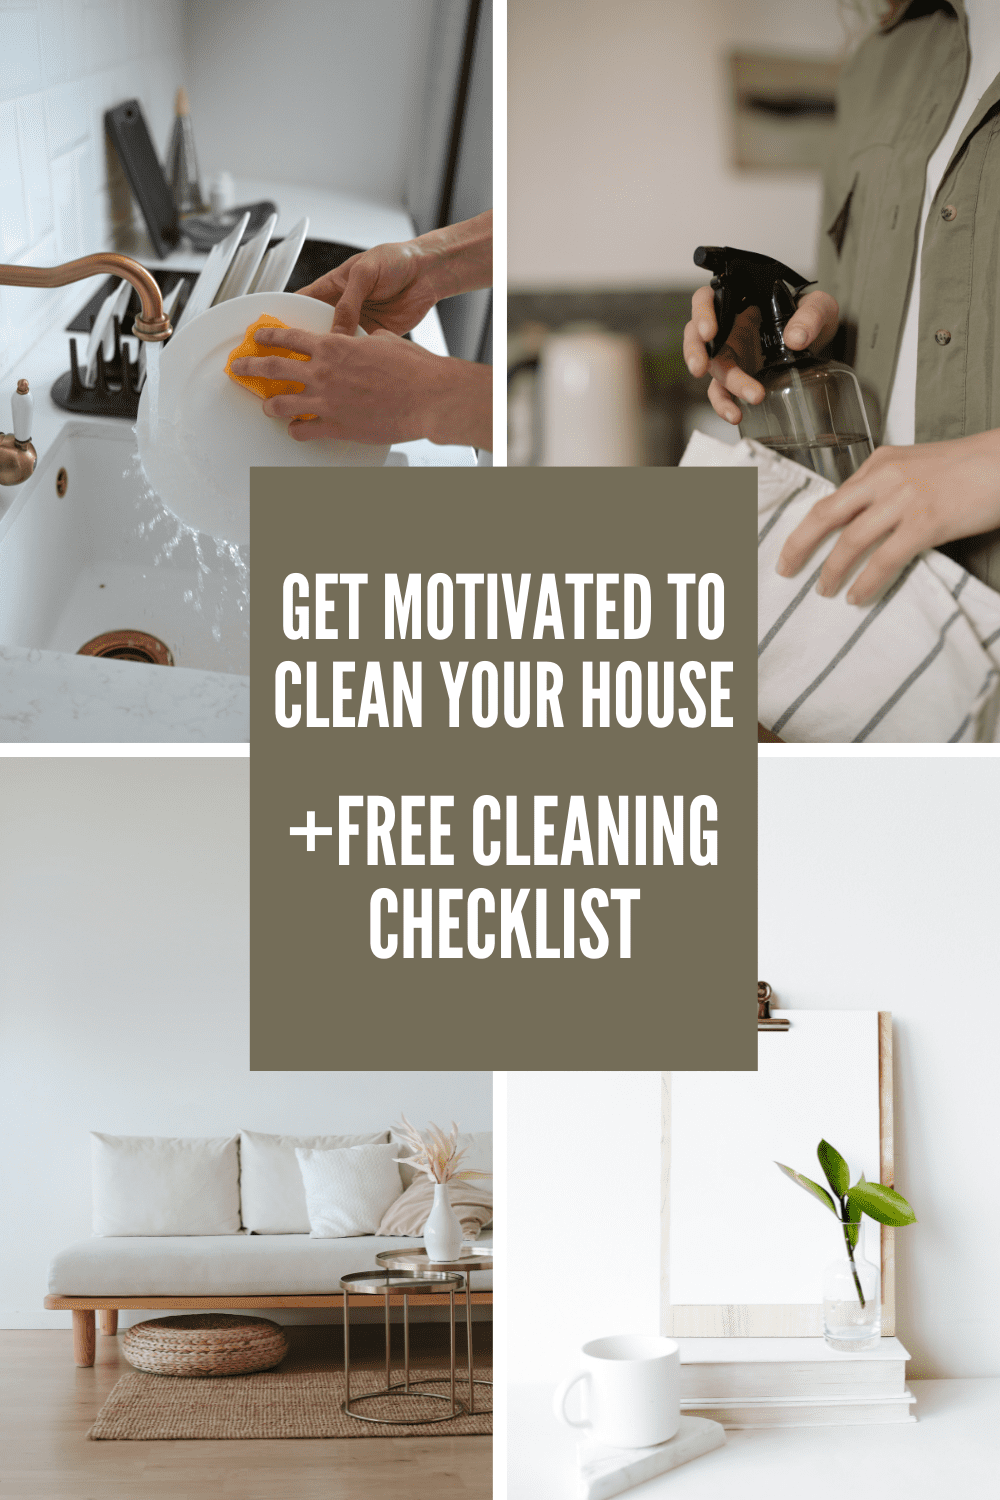 Collage of cleaning images and text overlaying saying to get motivated to clean your house + free cleaning checklist.